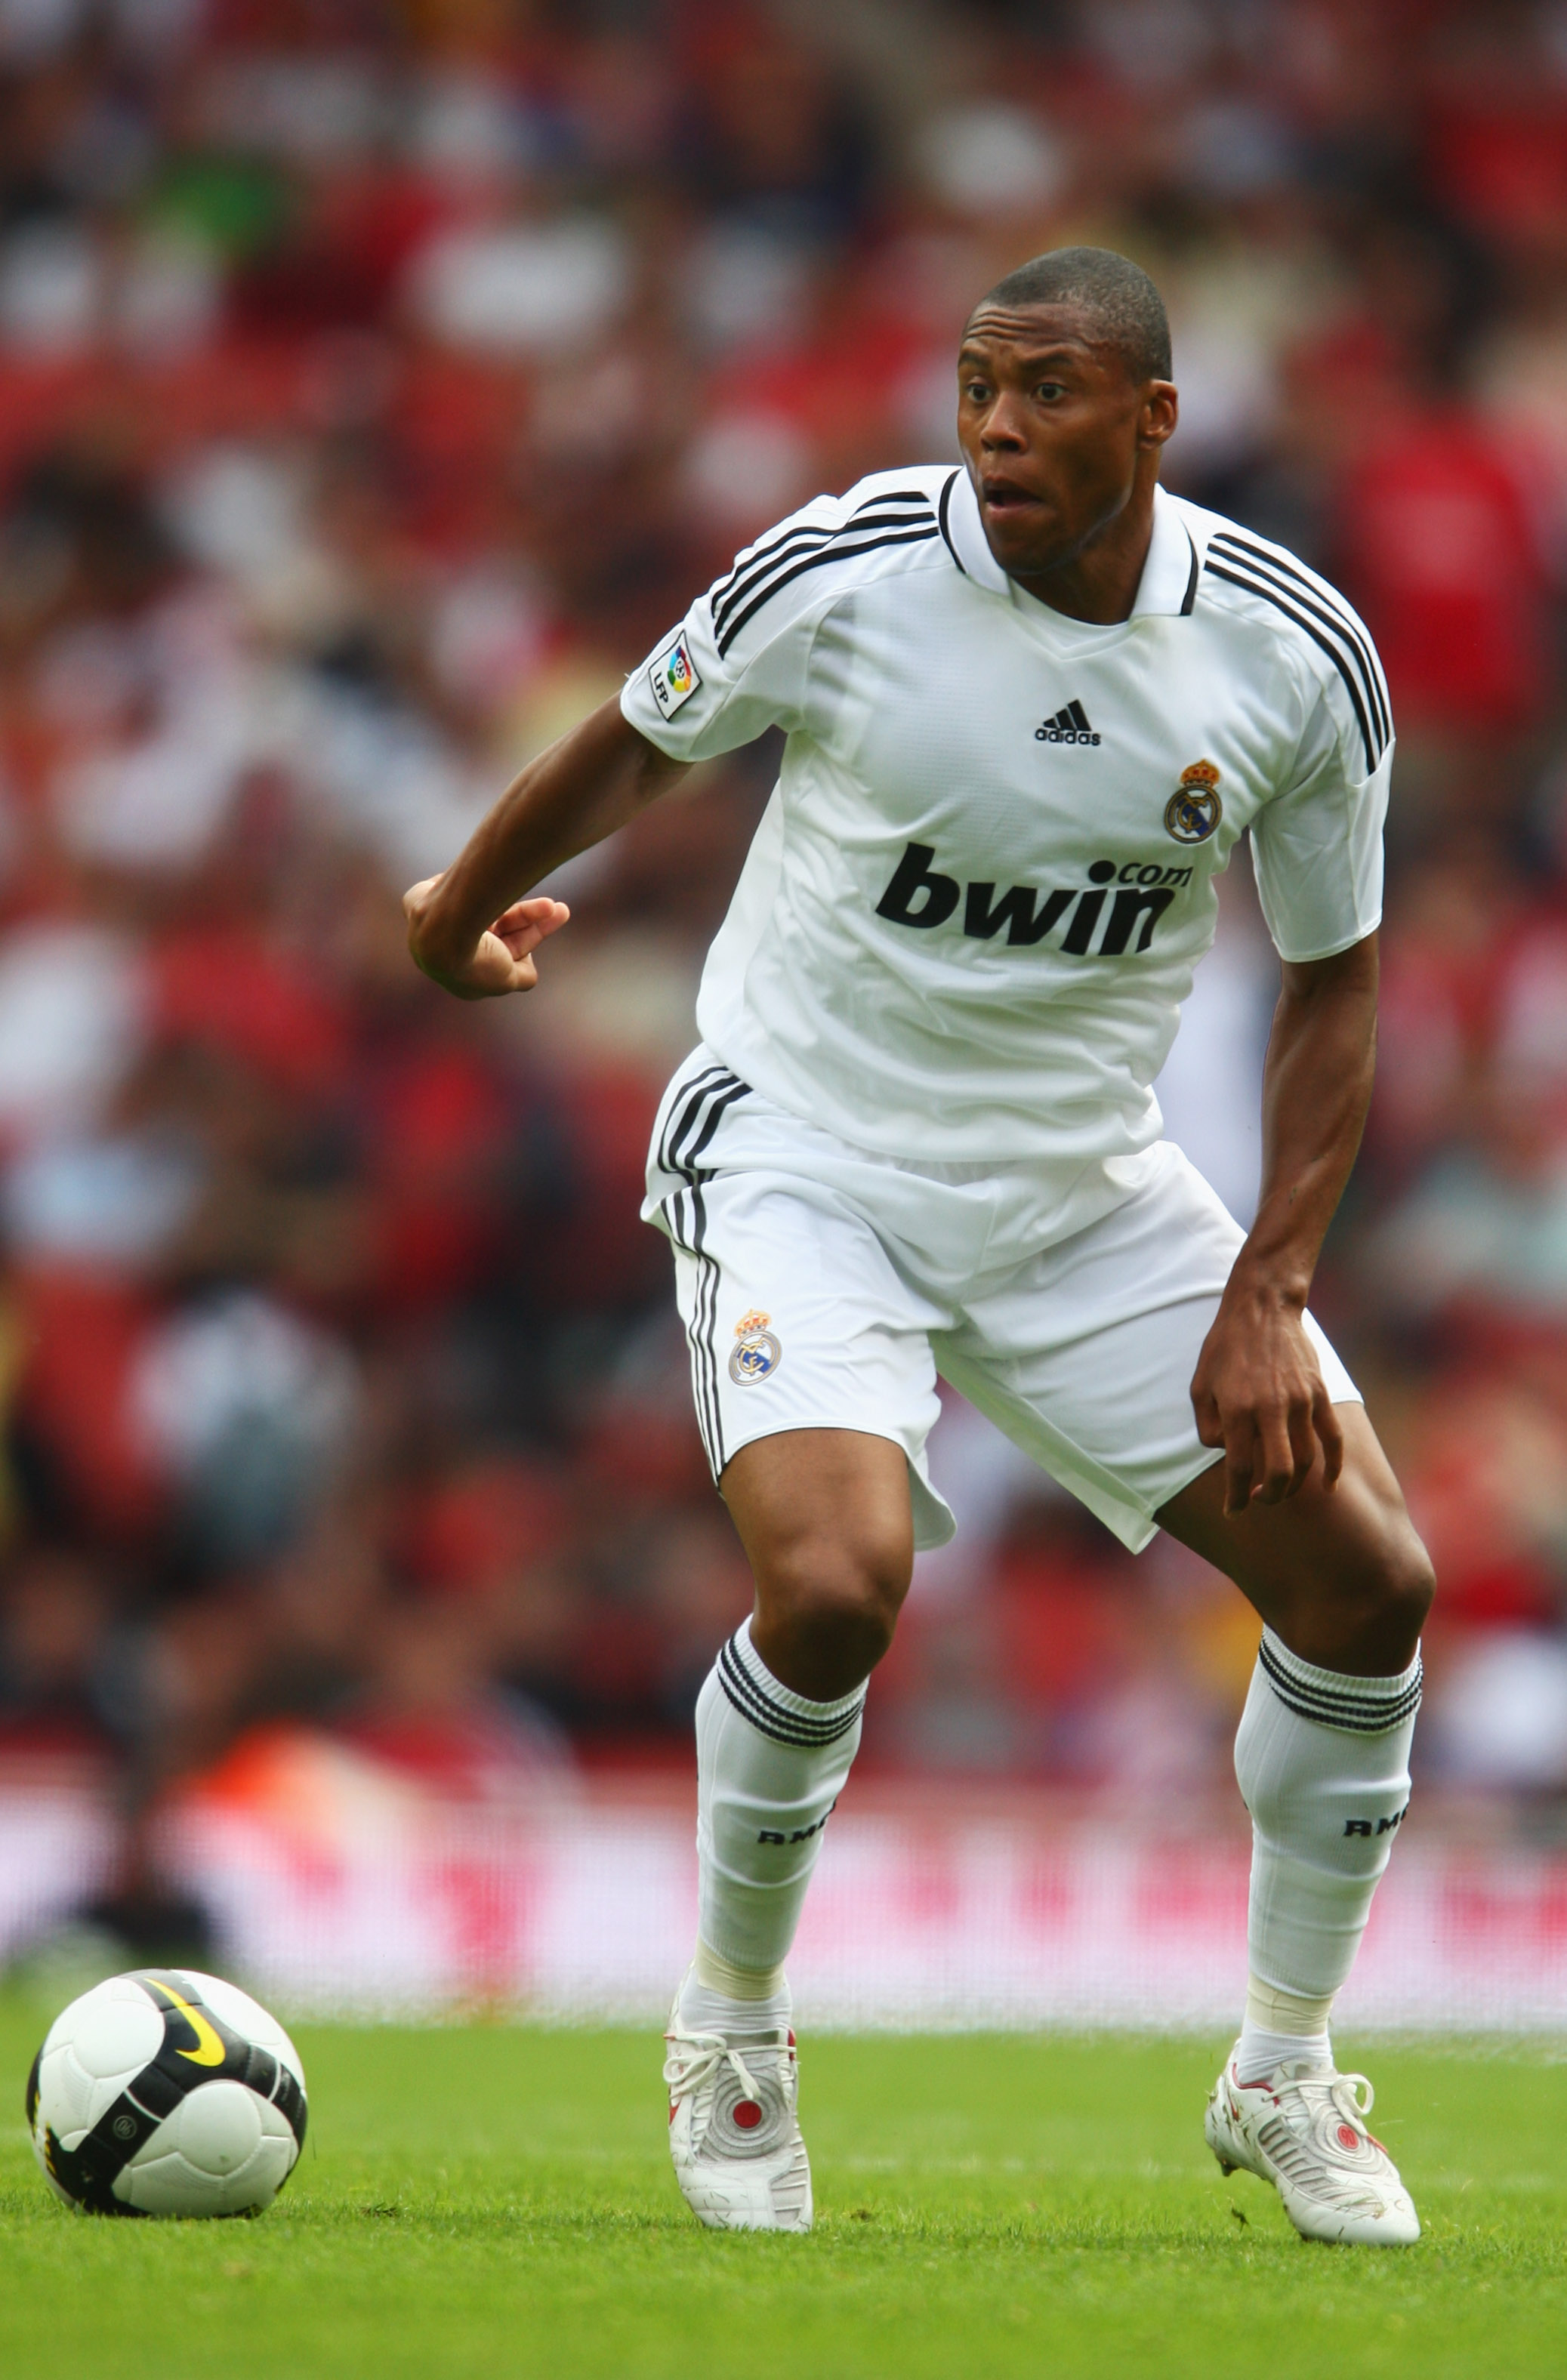 LONDON - AUGUST 02:  Julio Baptista of Real Madrid in action during the pre-season friendly match between SV Hamburg and Real Madrid during the Emirates Cup at the Emirates Stadium on August 2, 2008 in London, England.  (Photo by Jamie McDonald/Getty Imag